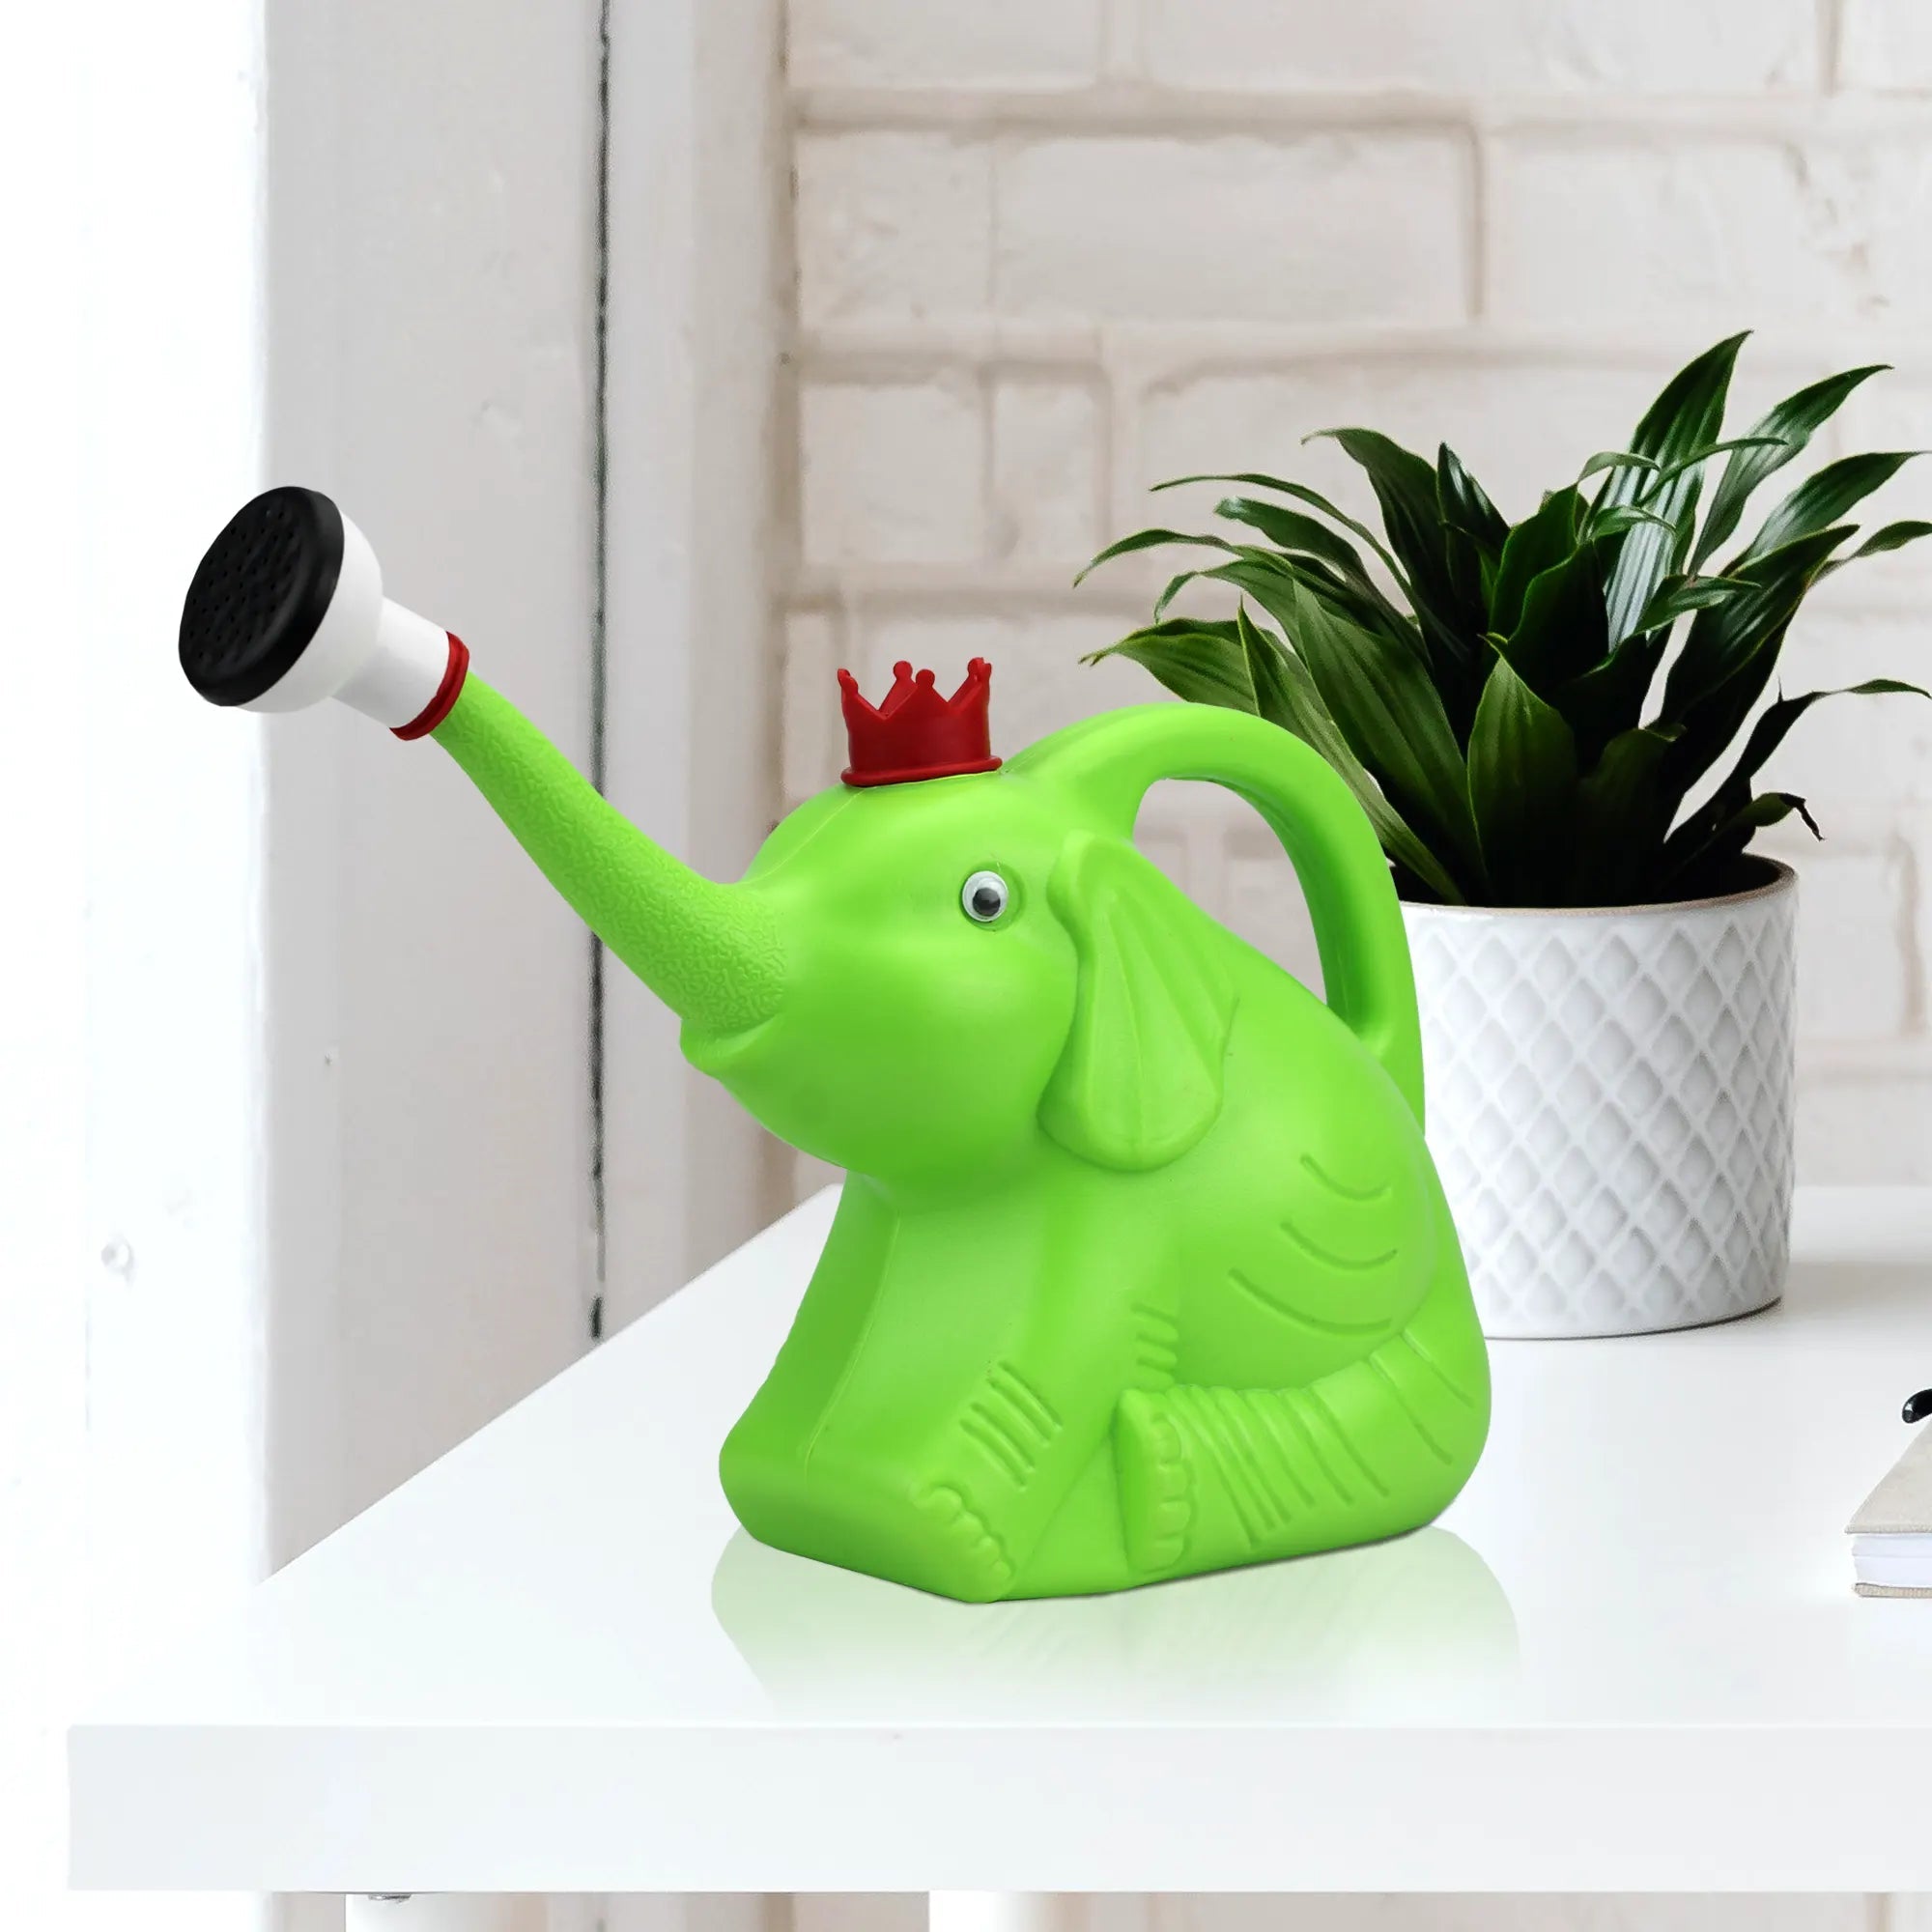 Elephant Watering Can with Detachable Sprayer - 1 Litre Urban Plant 